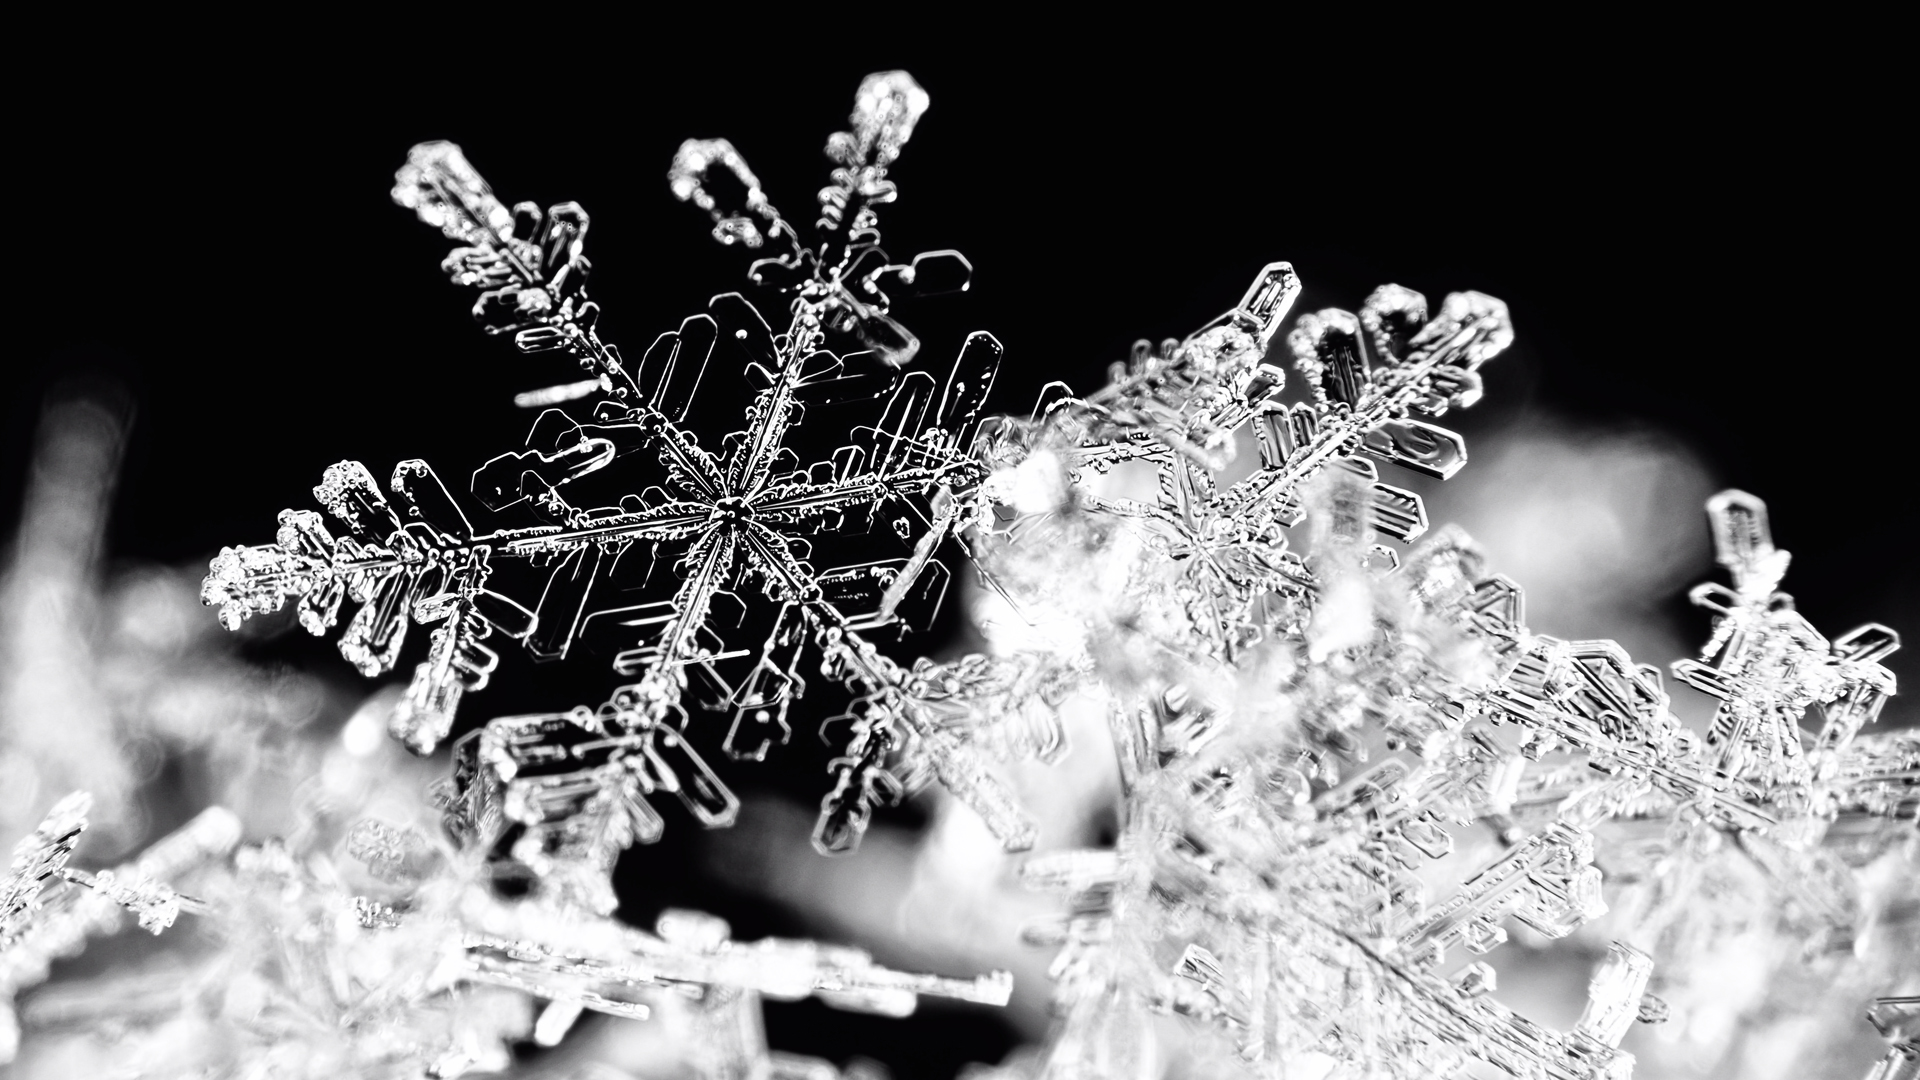 An extremely close up photo taken of a snowflake